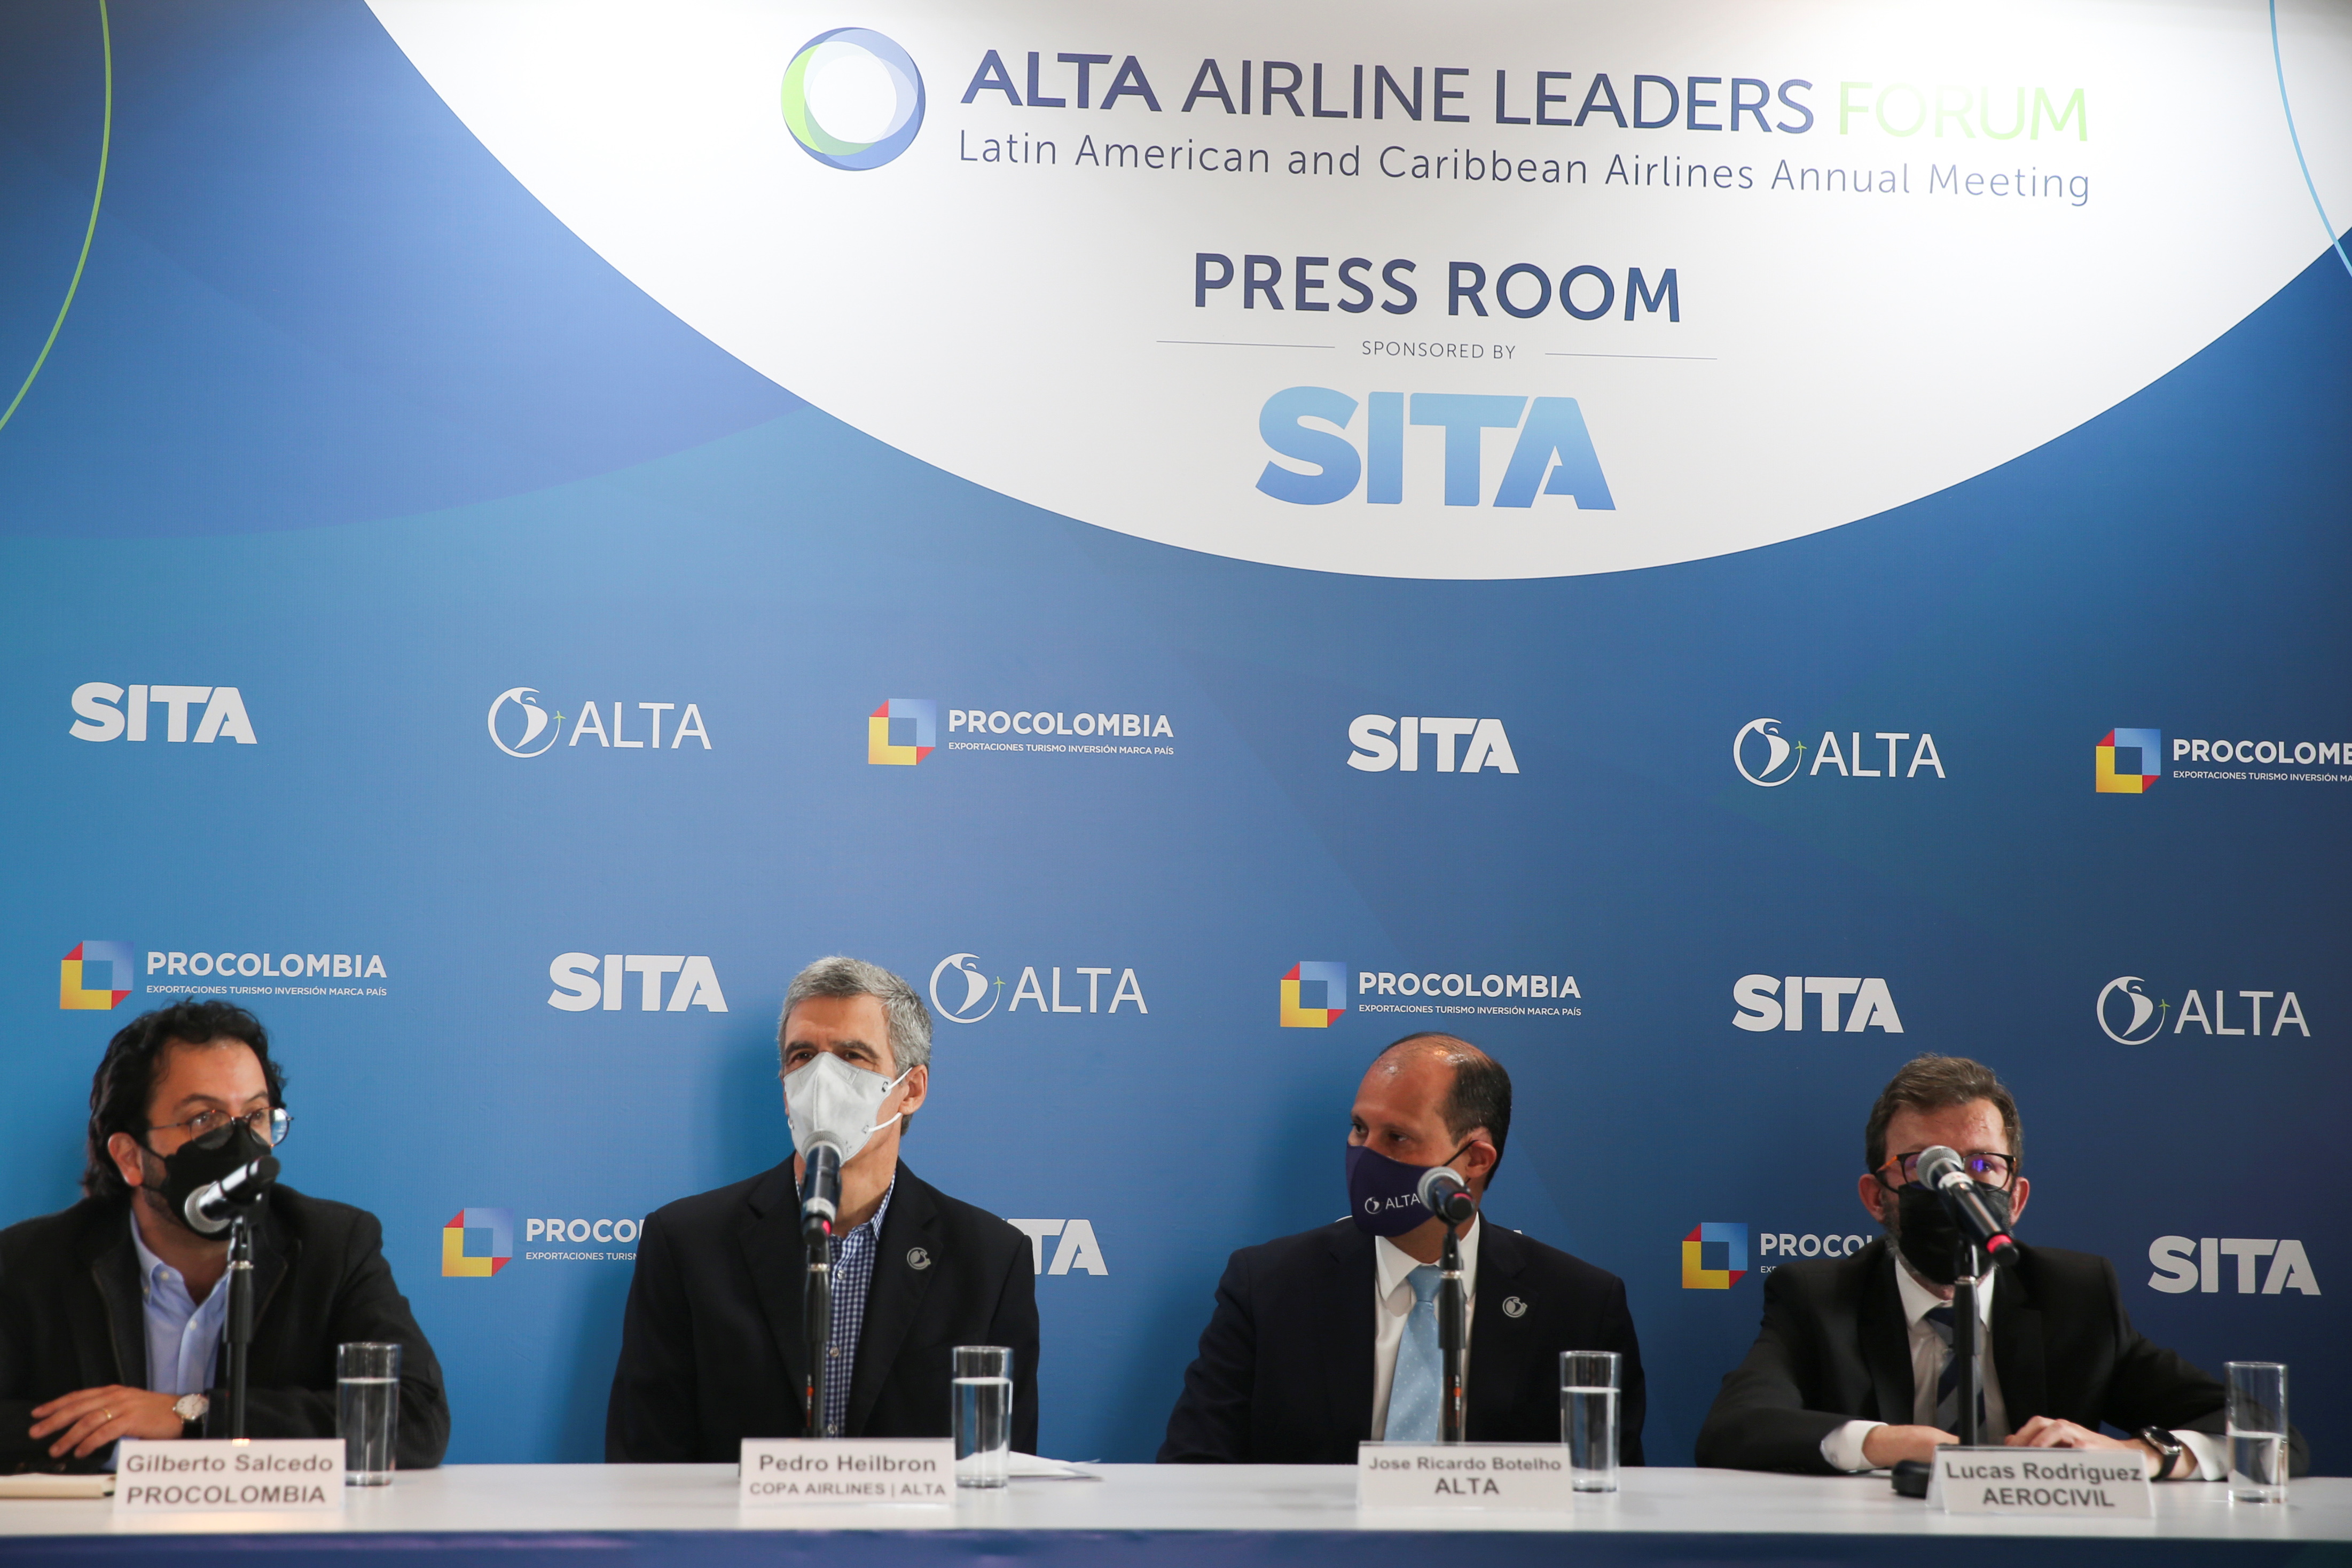 Pedro Heilbron CEO of Copa Airlines and Jose Ricardo Botelho CEO of ALTA attend the ALTA Airlines Leaders Forum, in Bogota